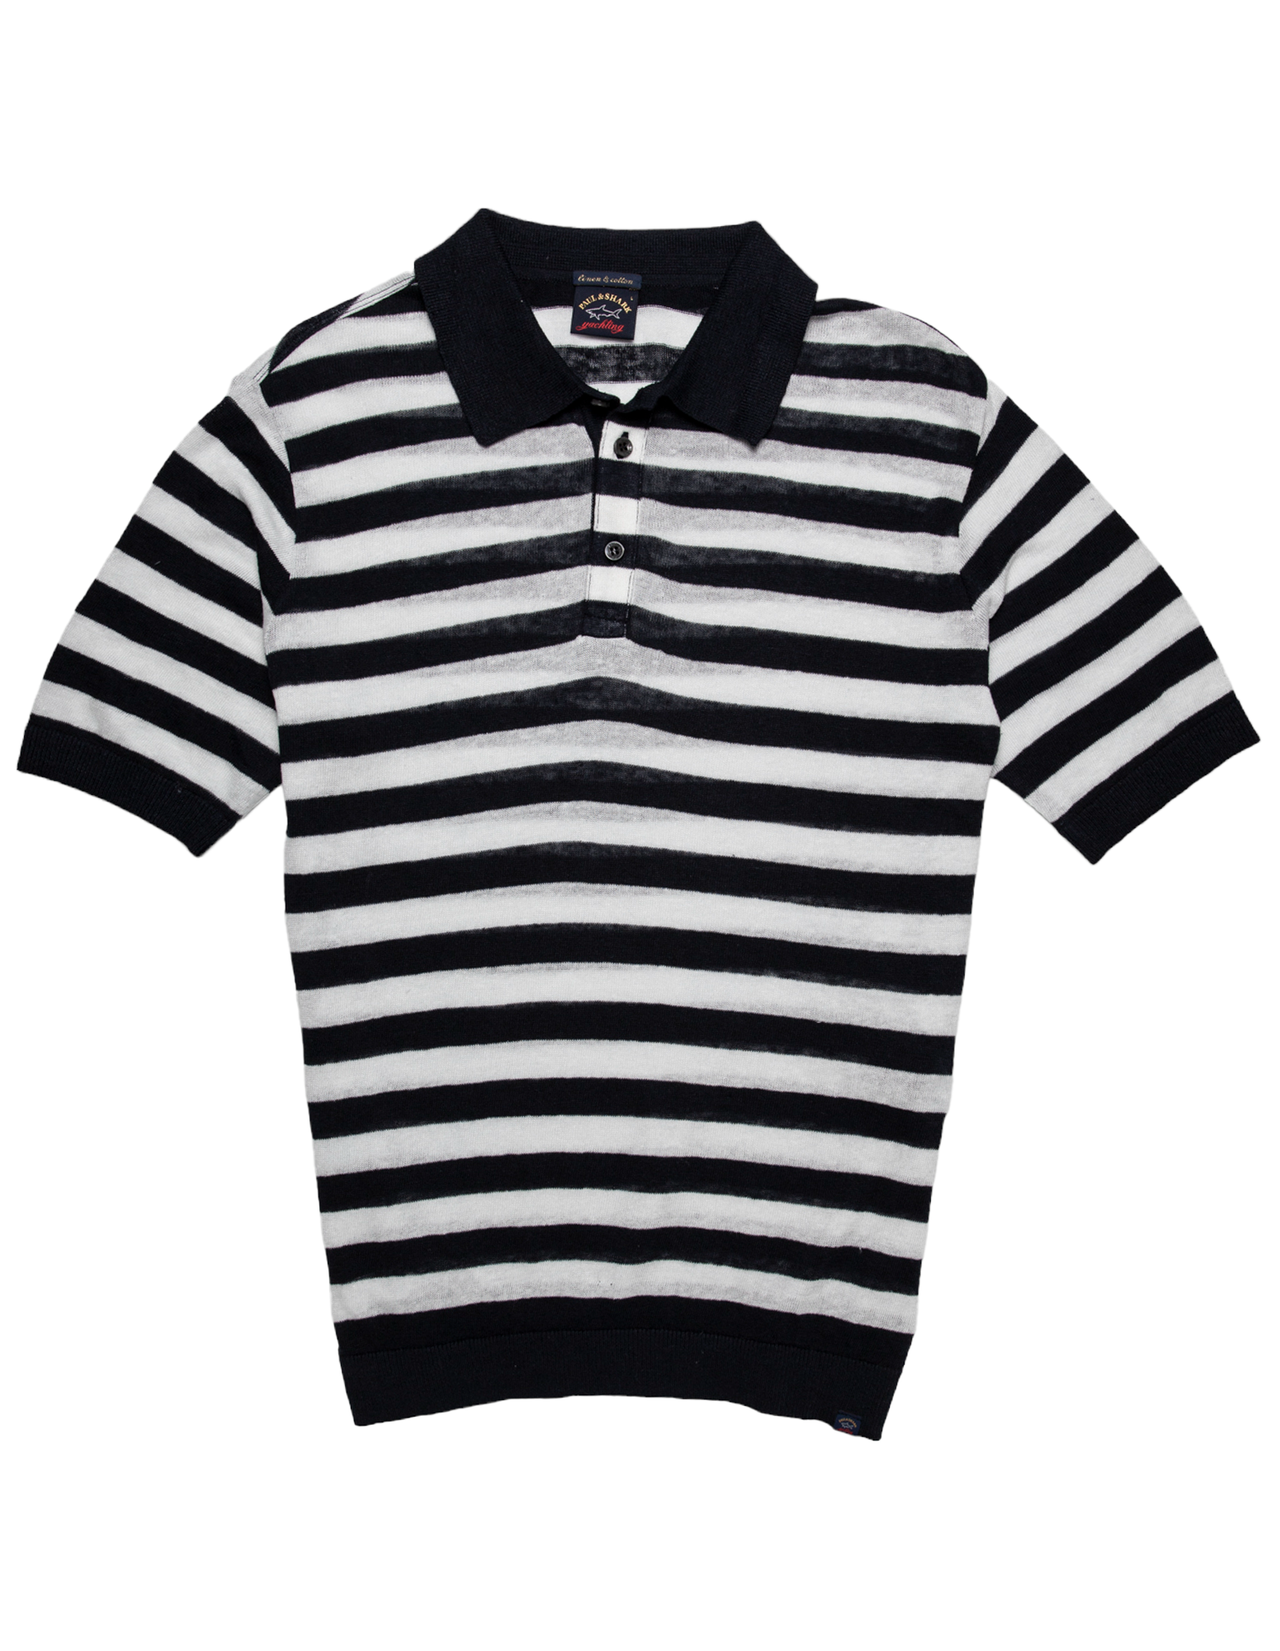 PAUL & SHARK Linen & Cotton Knitted Striped Polo NAVY/WHITE